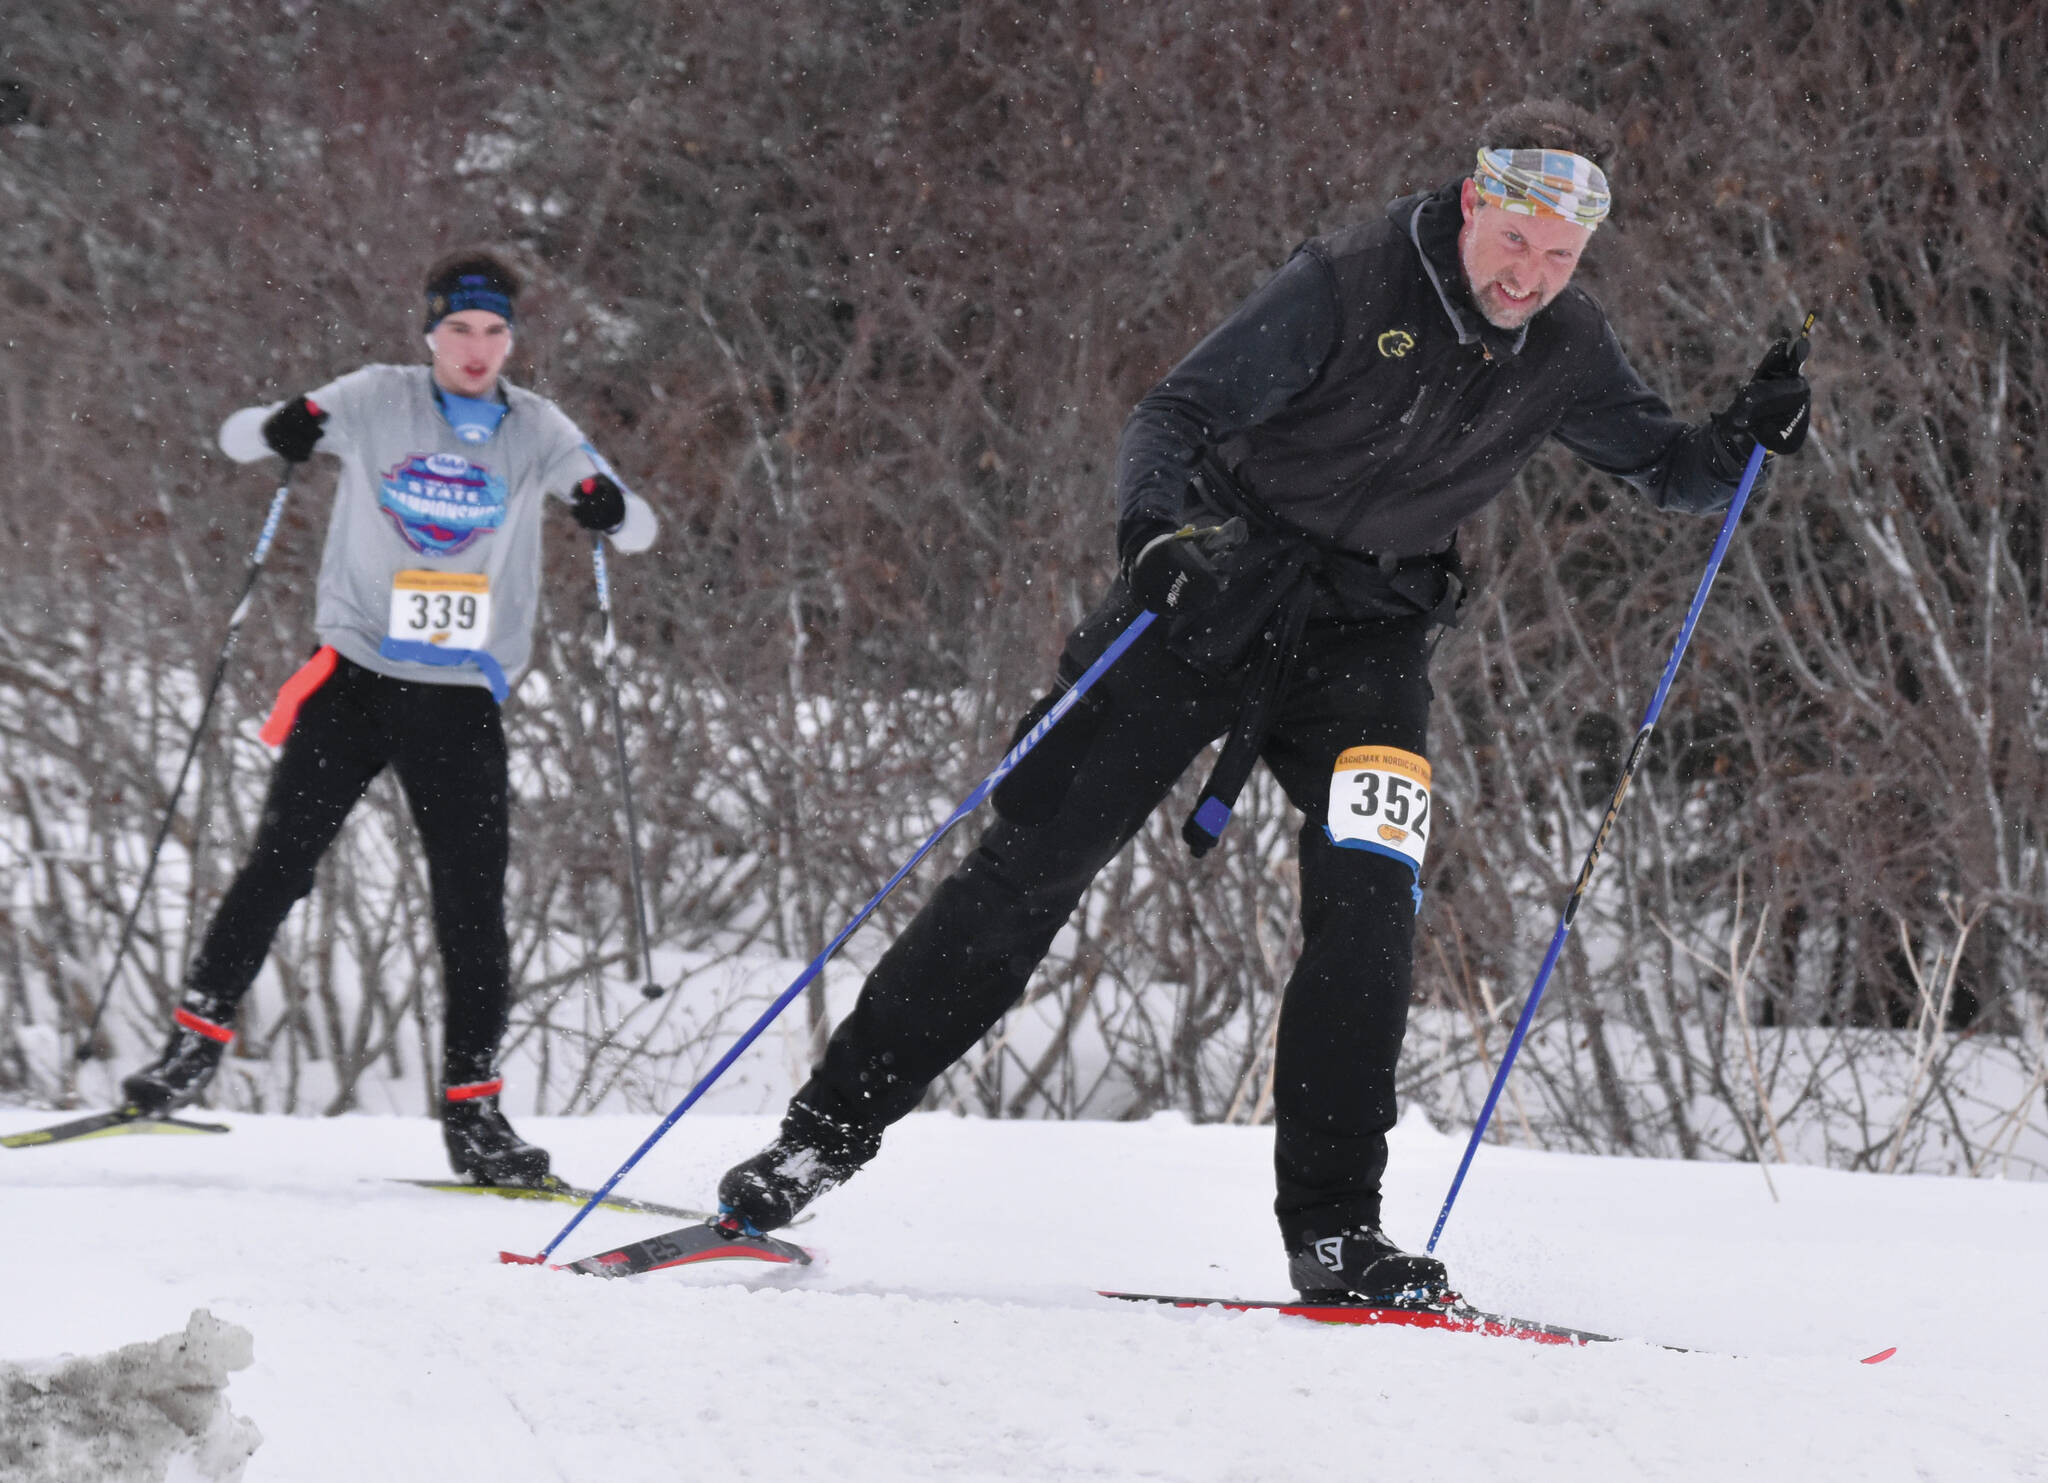 Homer’s Scott Hauser leads Homer’s Leif Jaworski up a hill in the 25-kilometer men’s race at the Kachemak Nordic Ski Marathon outside of Homer, Alaska, on Saturday, March 18, 2023. (Photo by Erin Thompson/Peninsula Clarion)